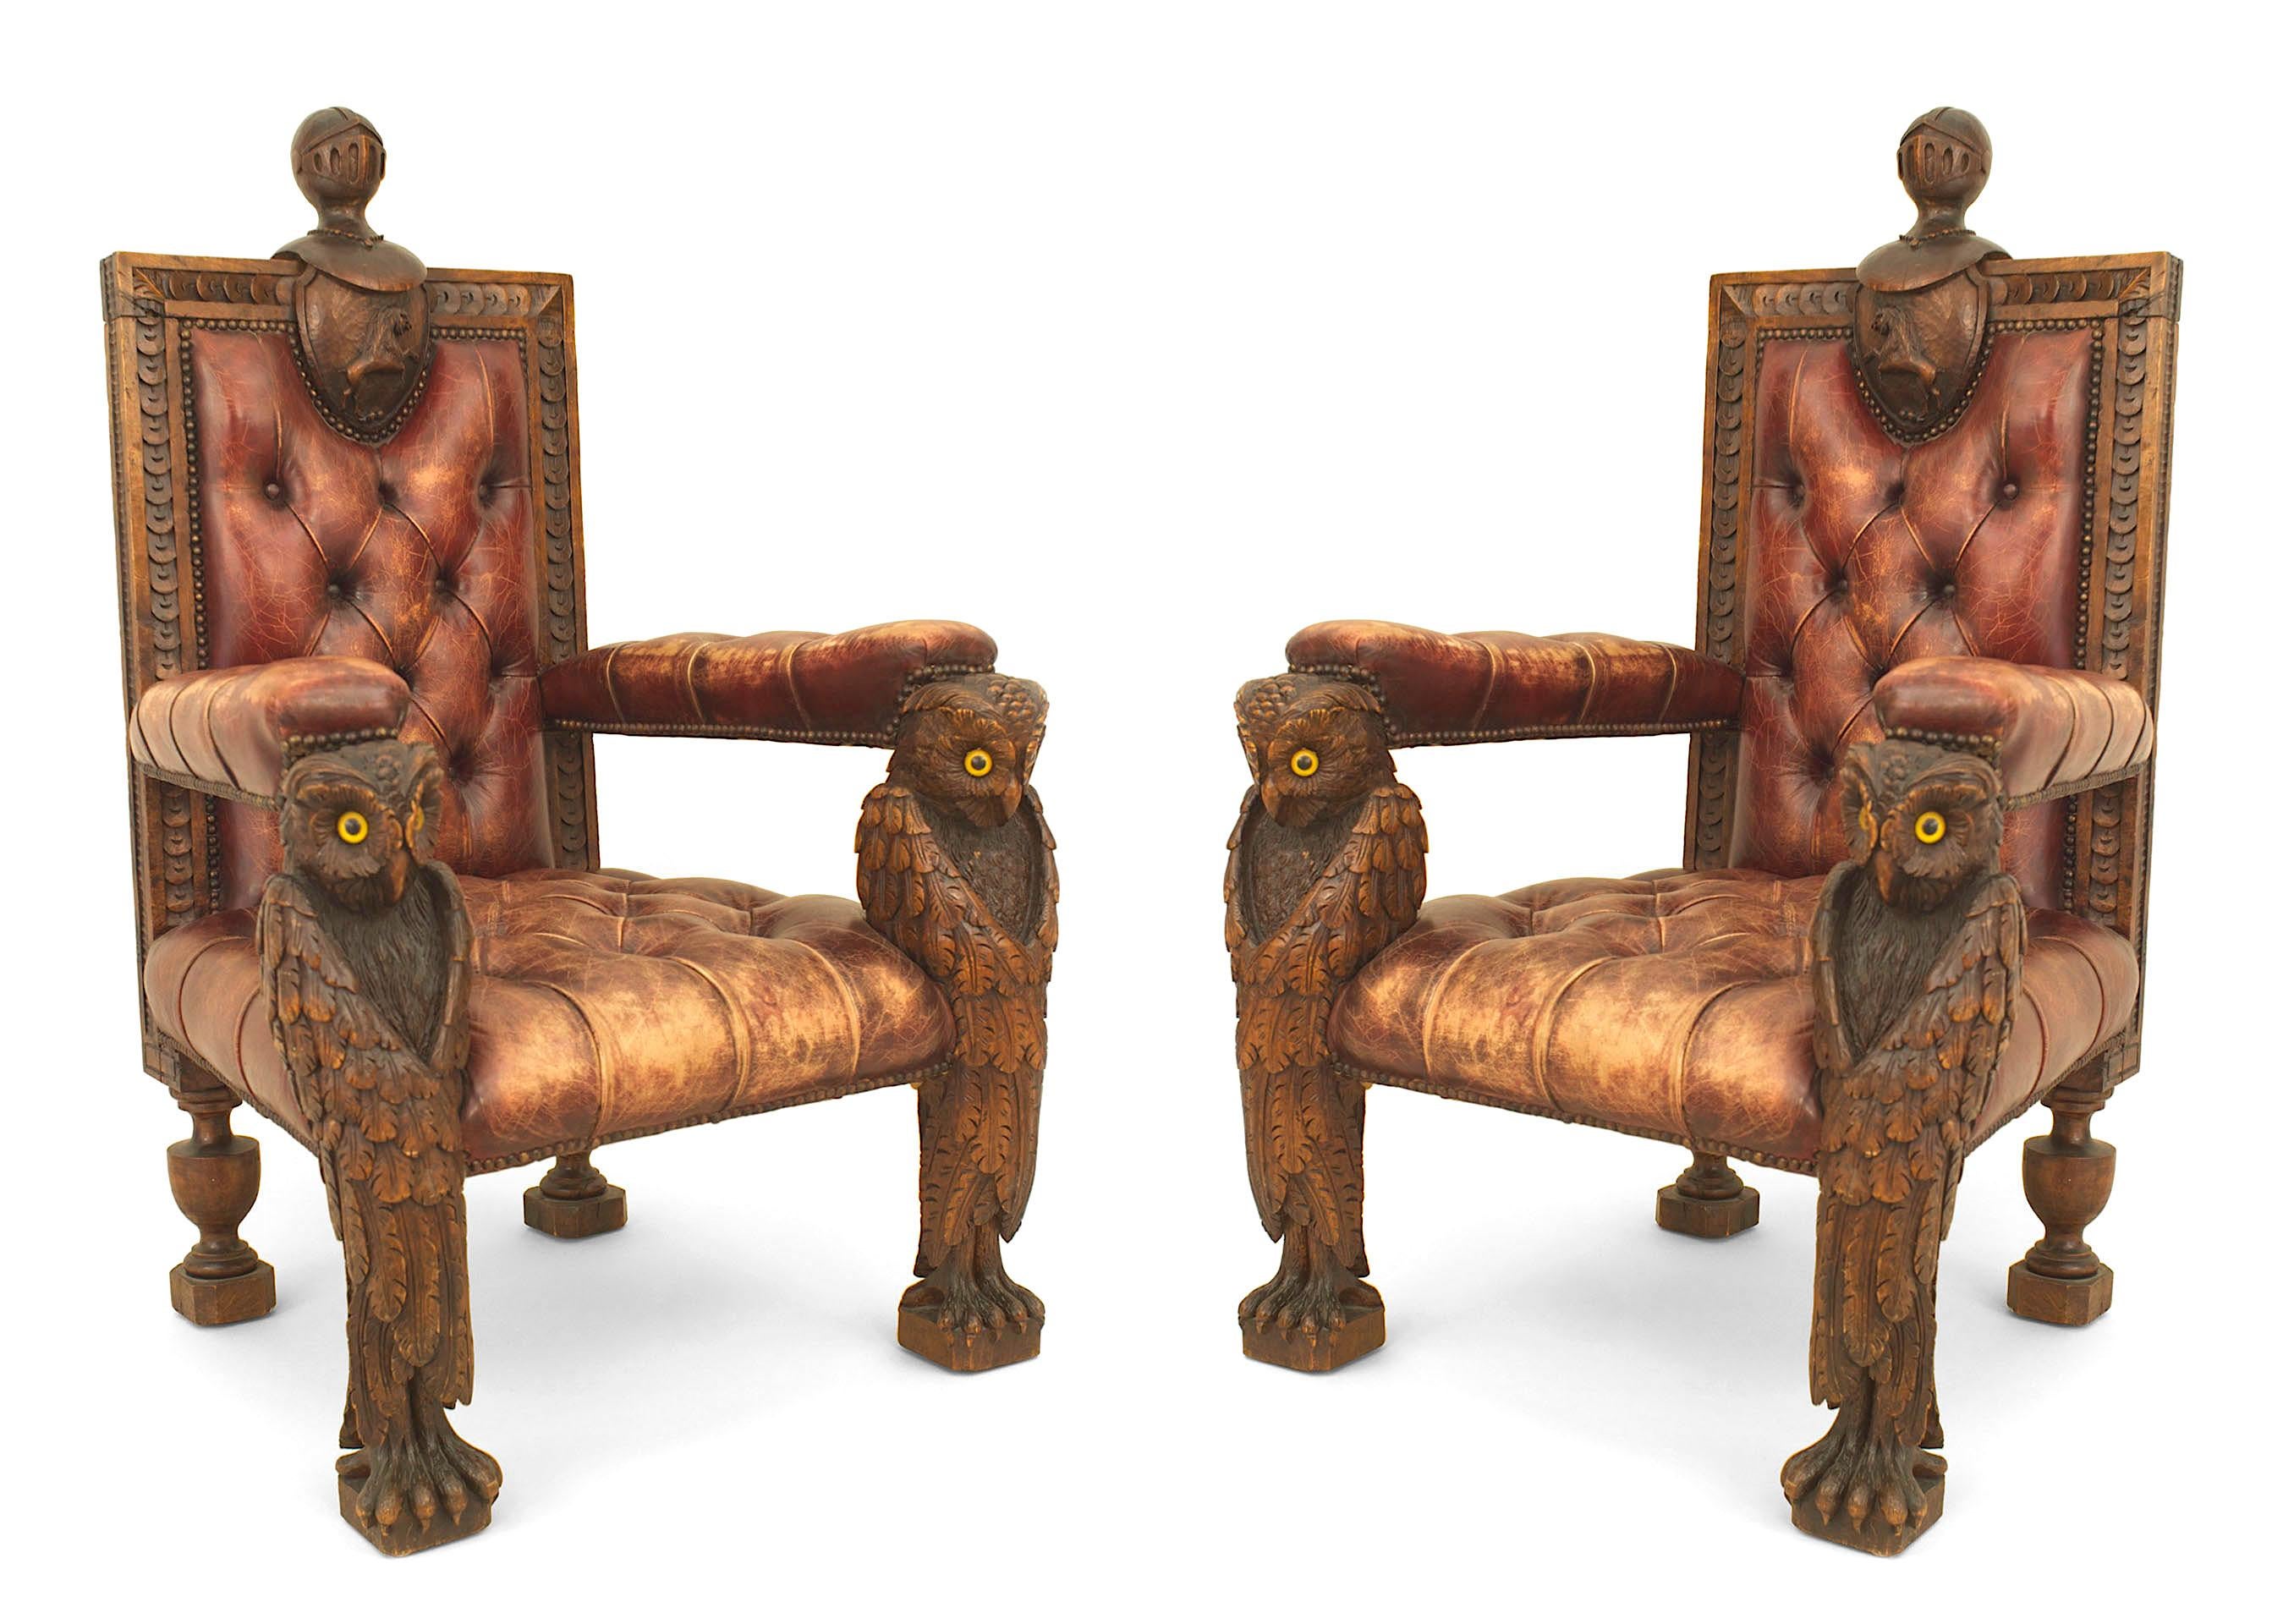 Pair of Rustic Continental style (19th Cent) walnut carved Armchairs with owl figural front legs and red tufted leather upholstery (matching sofa: 057845)
